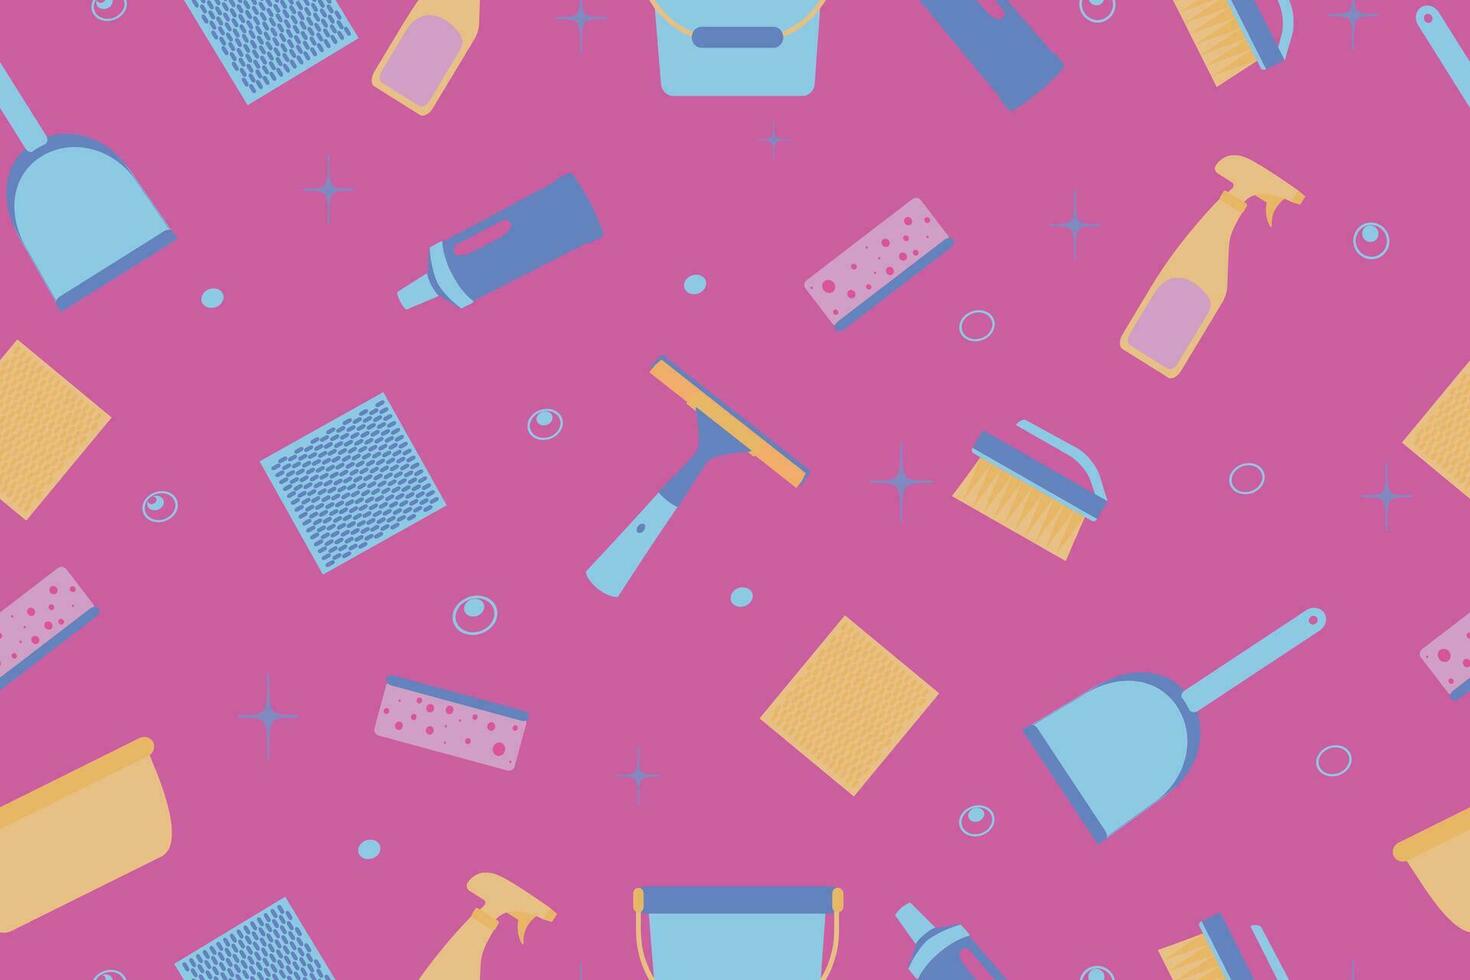 Seamless pattern on a pink background from cleaning tools. Household items for cleaning and washing. Rags, mop, soap, brush, bucket, window cleaner. Vector